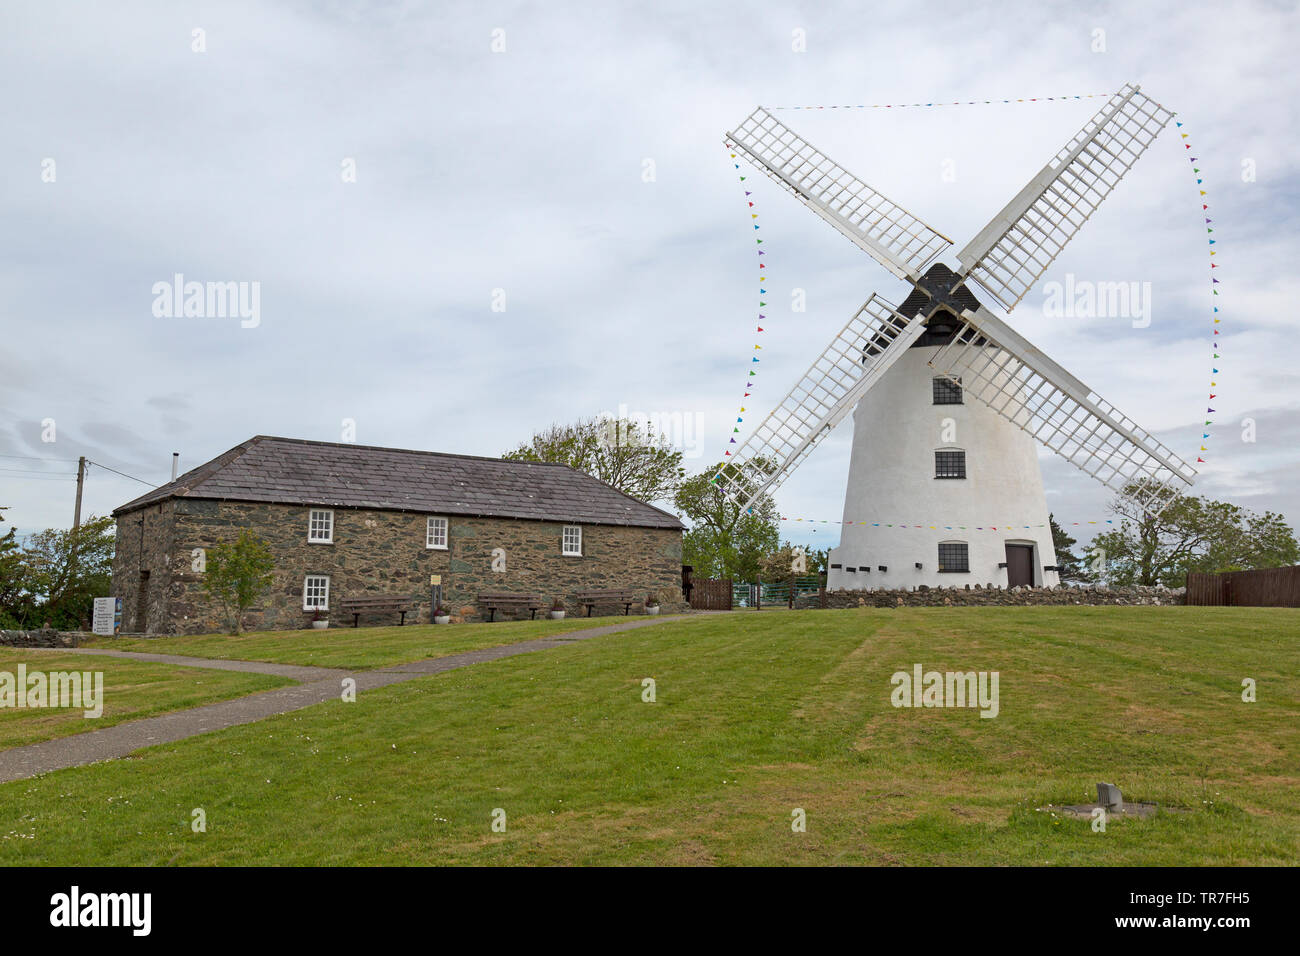 Melin Llynnon, or Llynnon Mill. The only working windmill left on the Island of Anglesey in North Wales. Built in 1775. Stock Photo